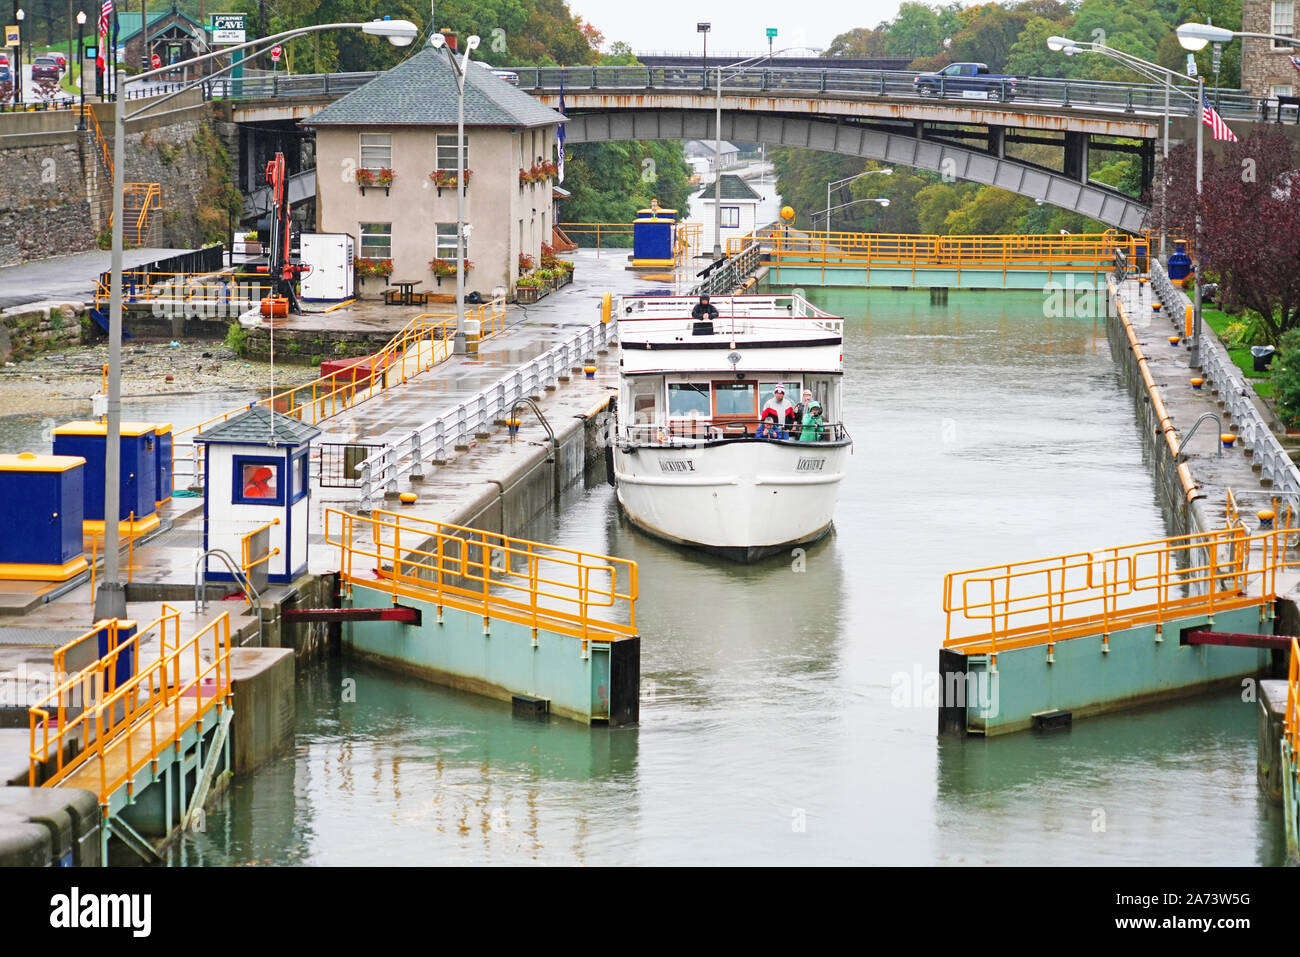 Erie Canal cruise boat Lockview V, a 125-passenger double-deck motor vessel built of the Great Lakes, exiting Lock 35 after being raised 50 feet at Lo Stock Photo